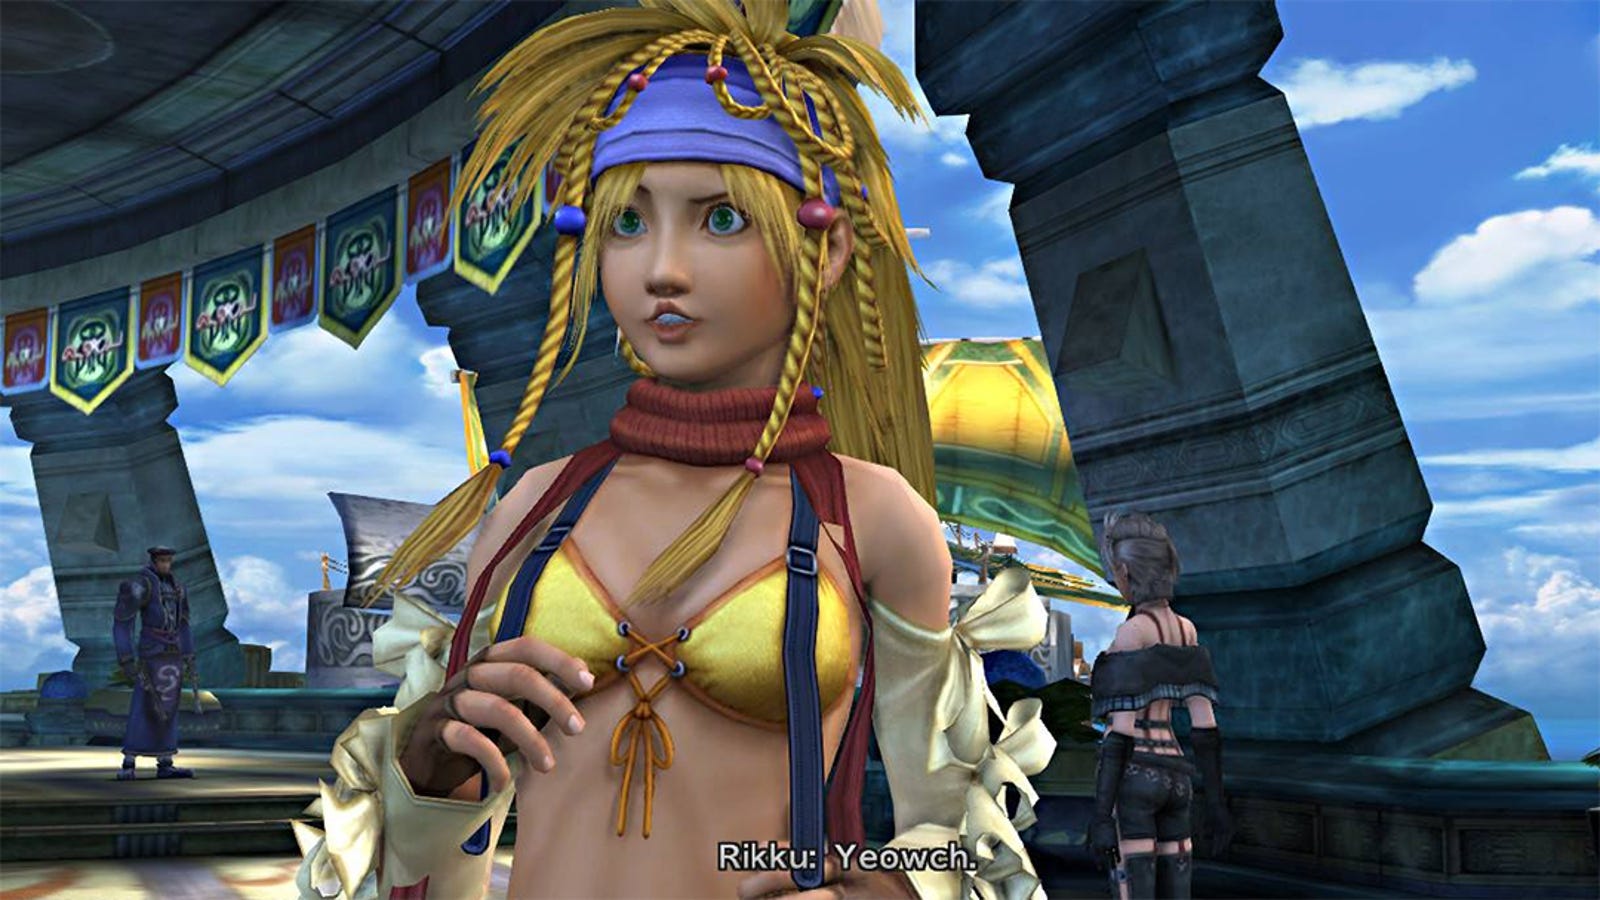 final-fantasy-x-2-is-all-the-fun-of-the-series-without-the-self-importance